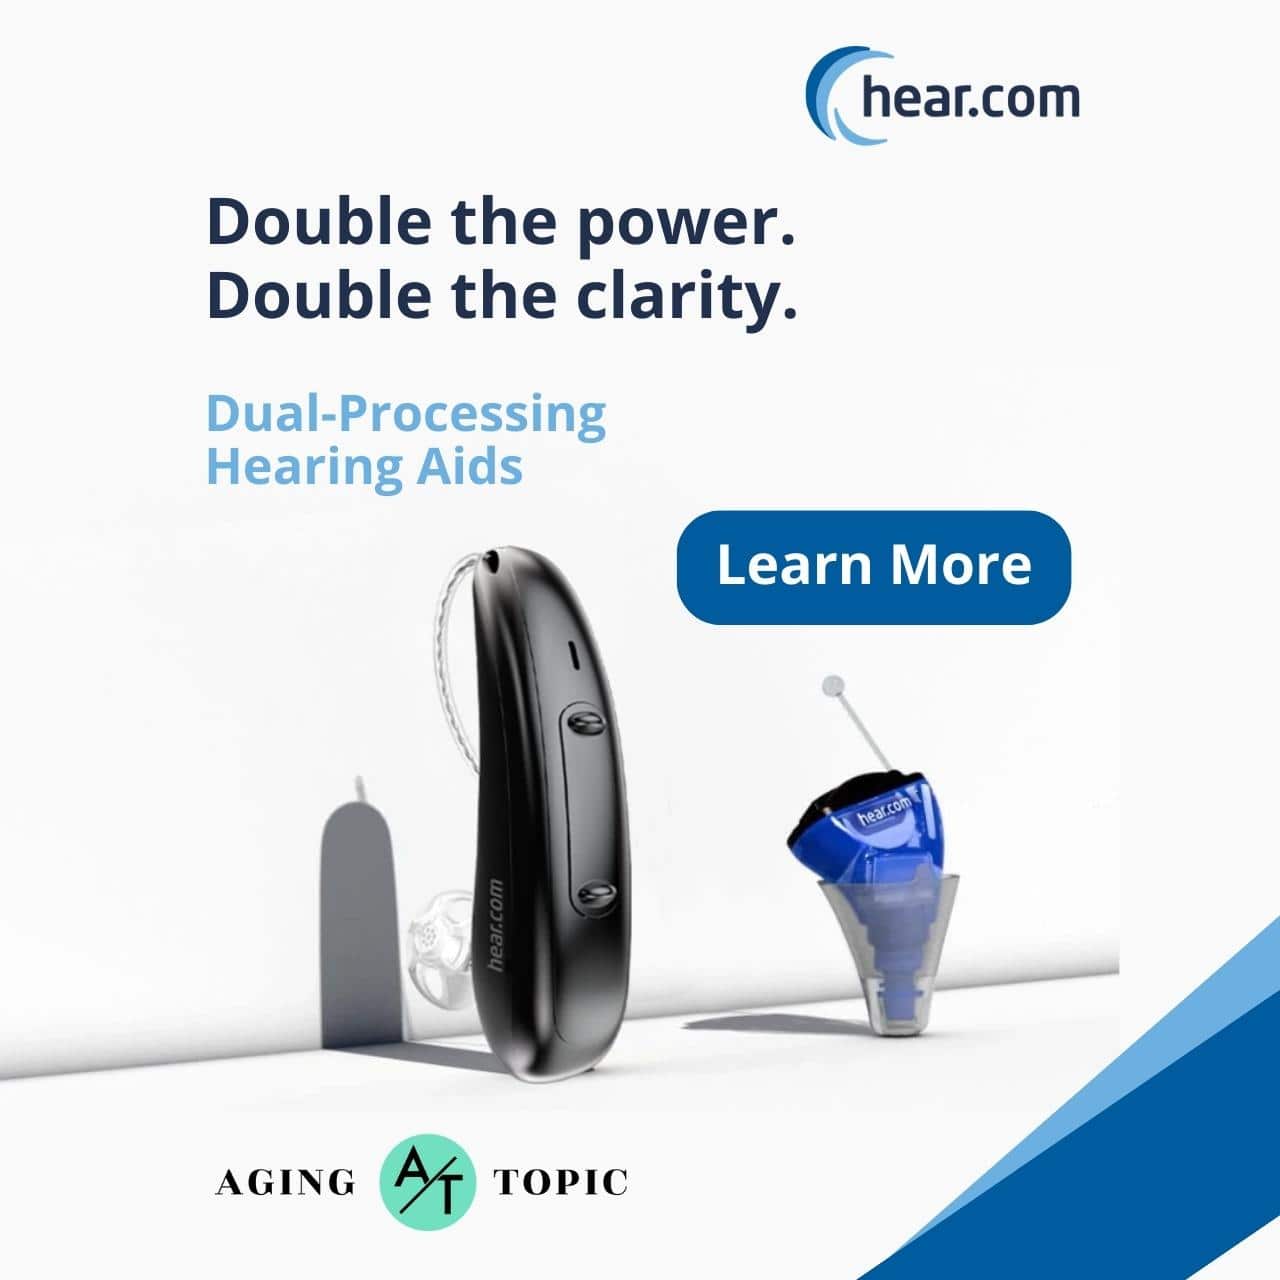 Double the power. Double the clarity. Dual-processing hearing aids from https://hear.com - Learn More.